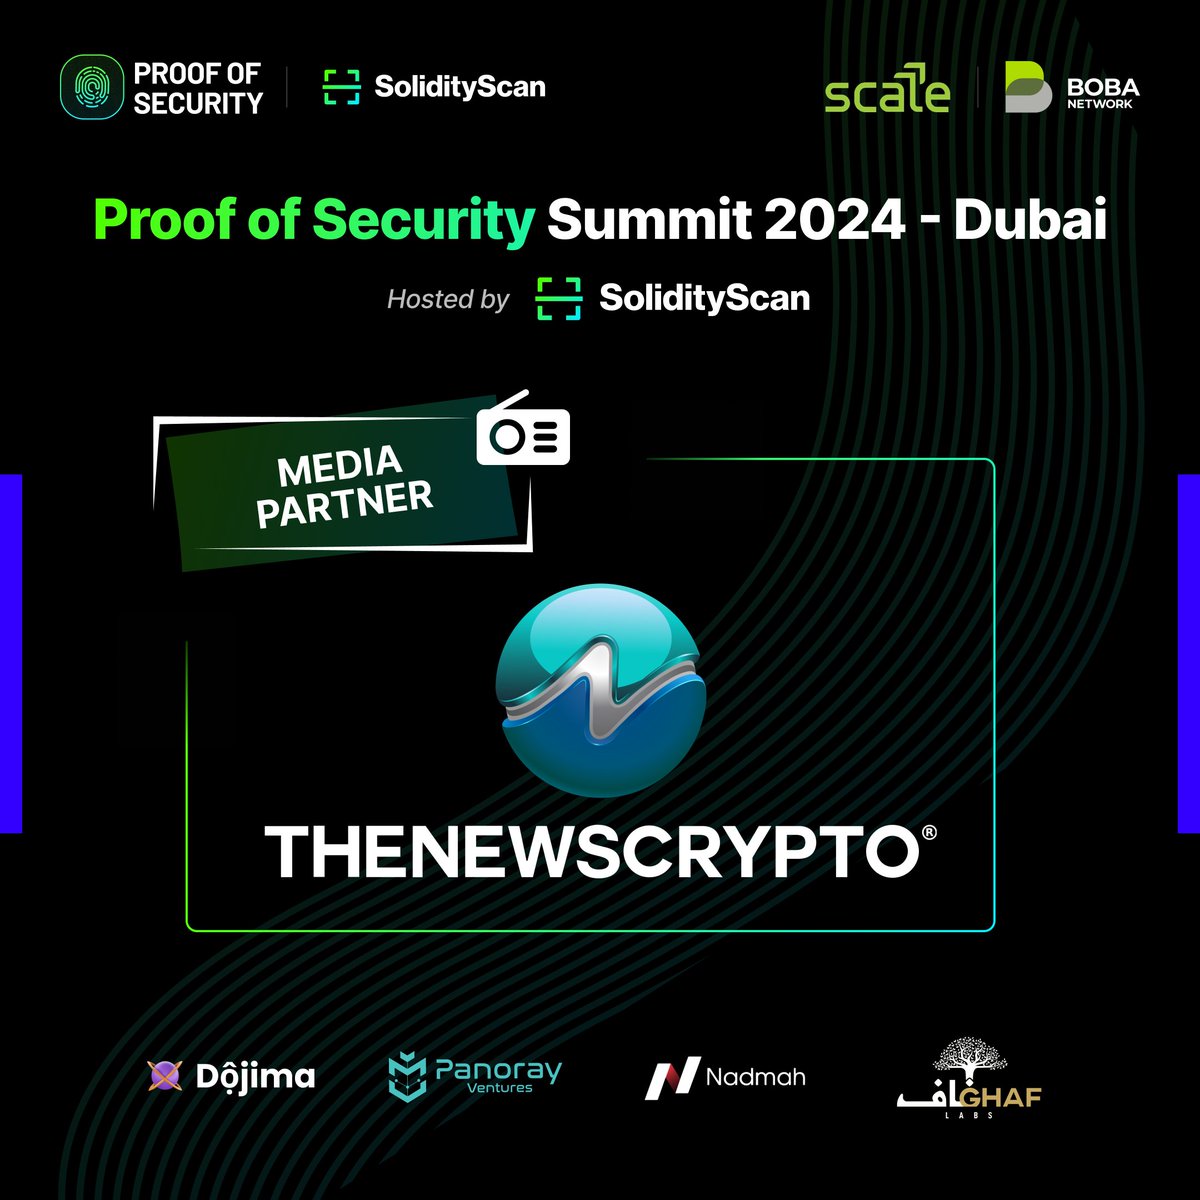 Happy to onboard, @The_NewsCrypto as a media partner for Proof of Security Summit 2024 Dubai by @SolidityScan. Link to Register: lu.ma/Proofofsecurit…